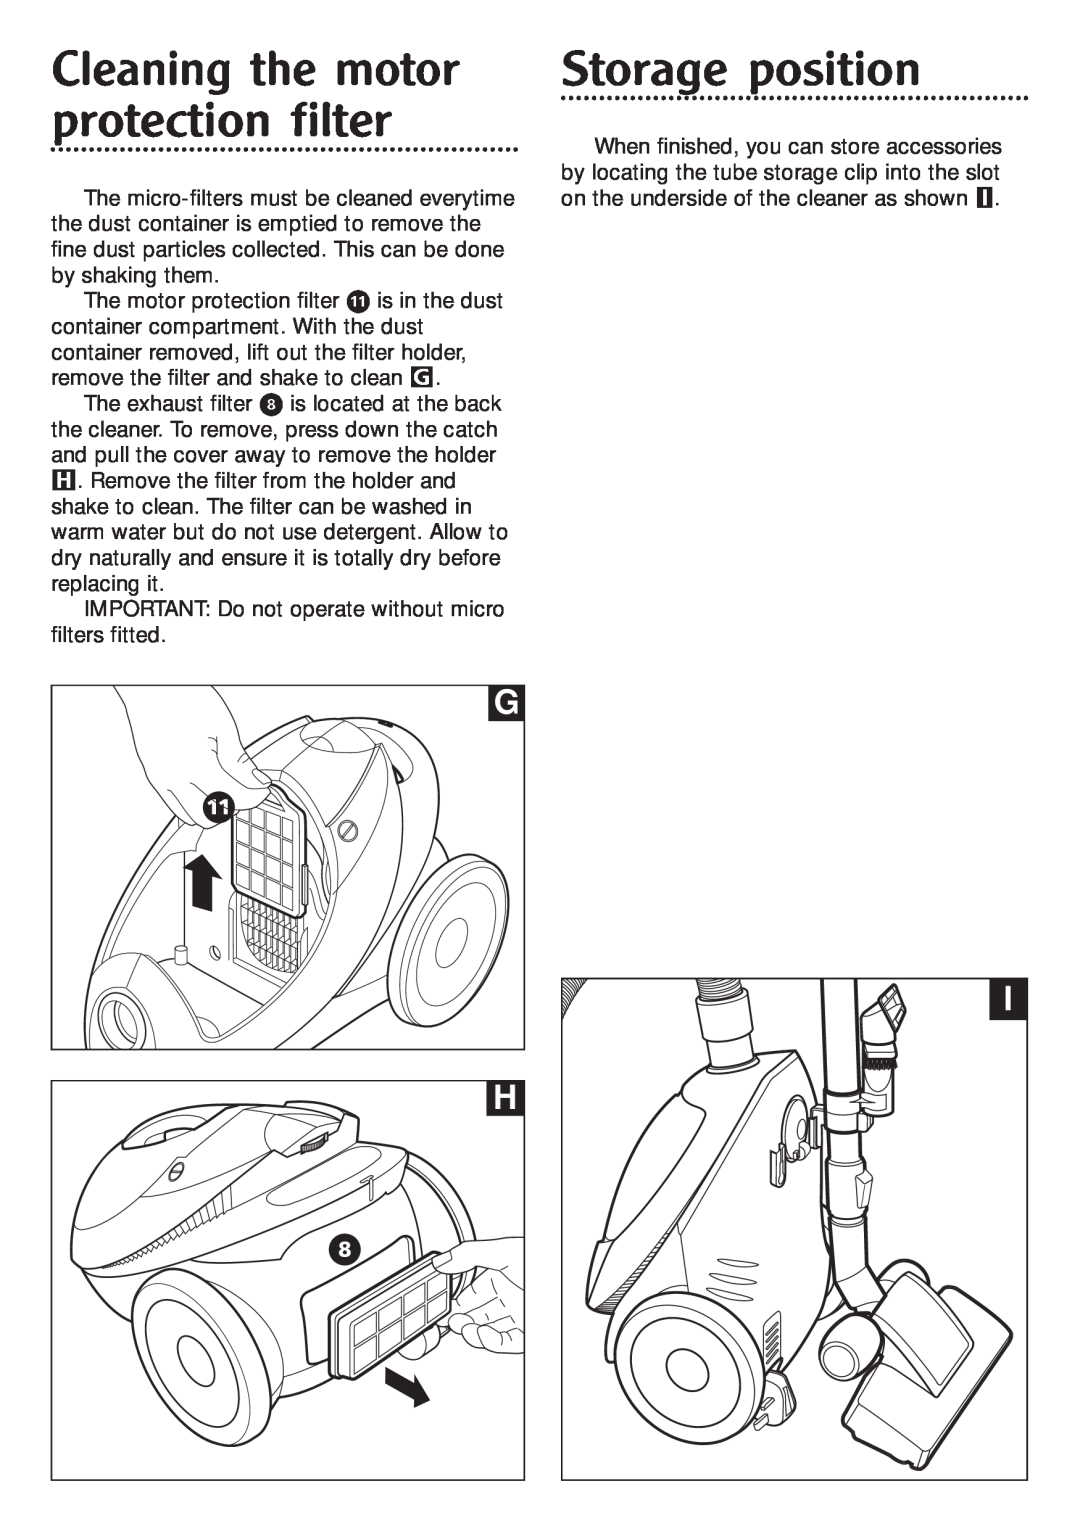 Morphy Richards Orb vacuum cleaner manual Cleaning the motor protection filter, Storage position 